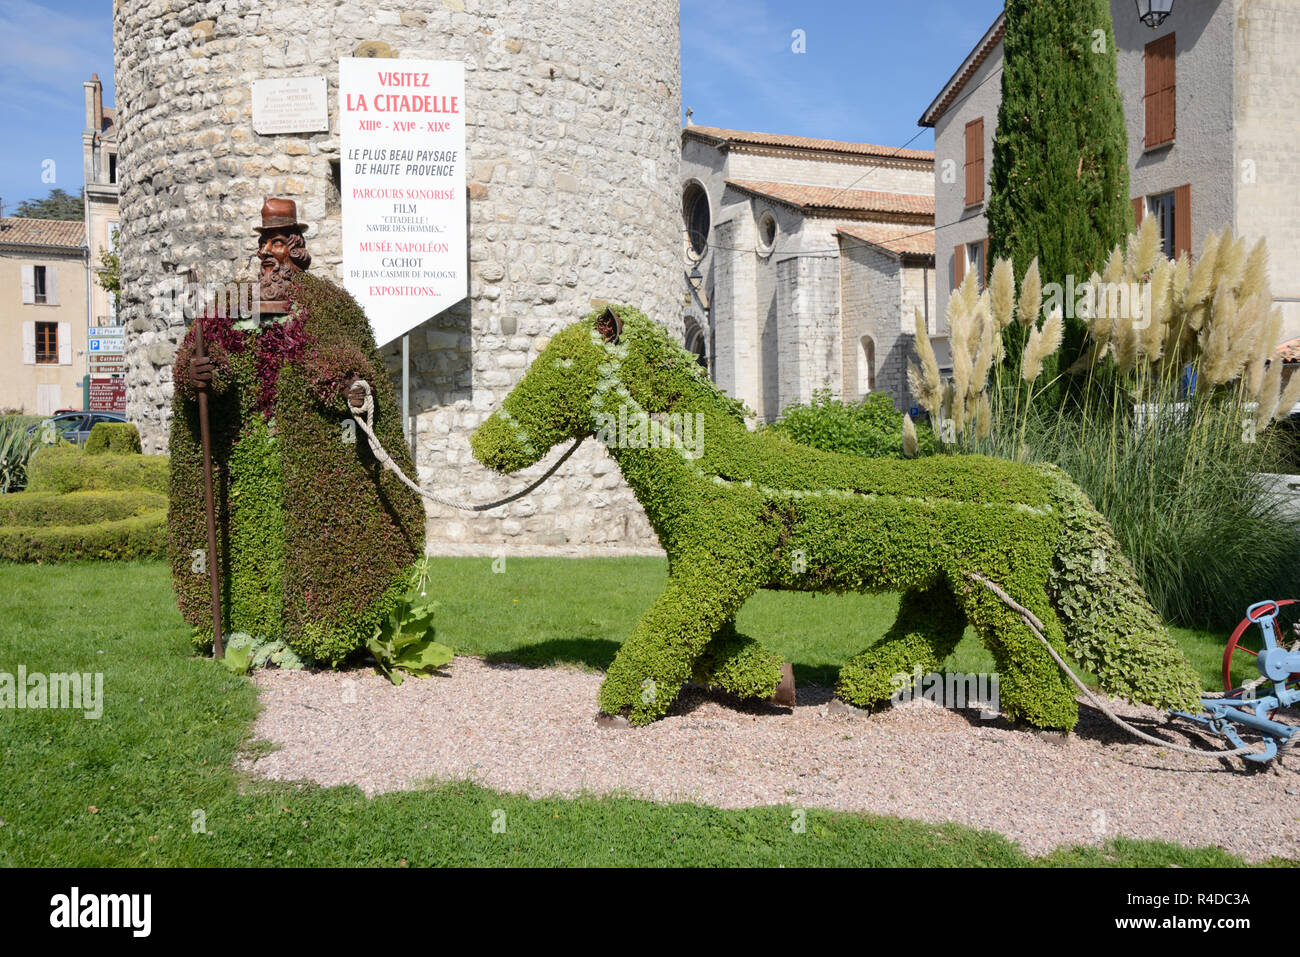 Topiary Sculpture of Provencal Shephard or Farmer and Donkey in Town Square Sisteron Provence France Stock Photo